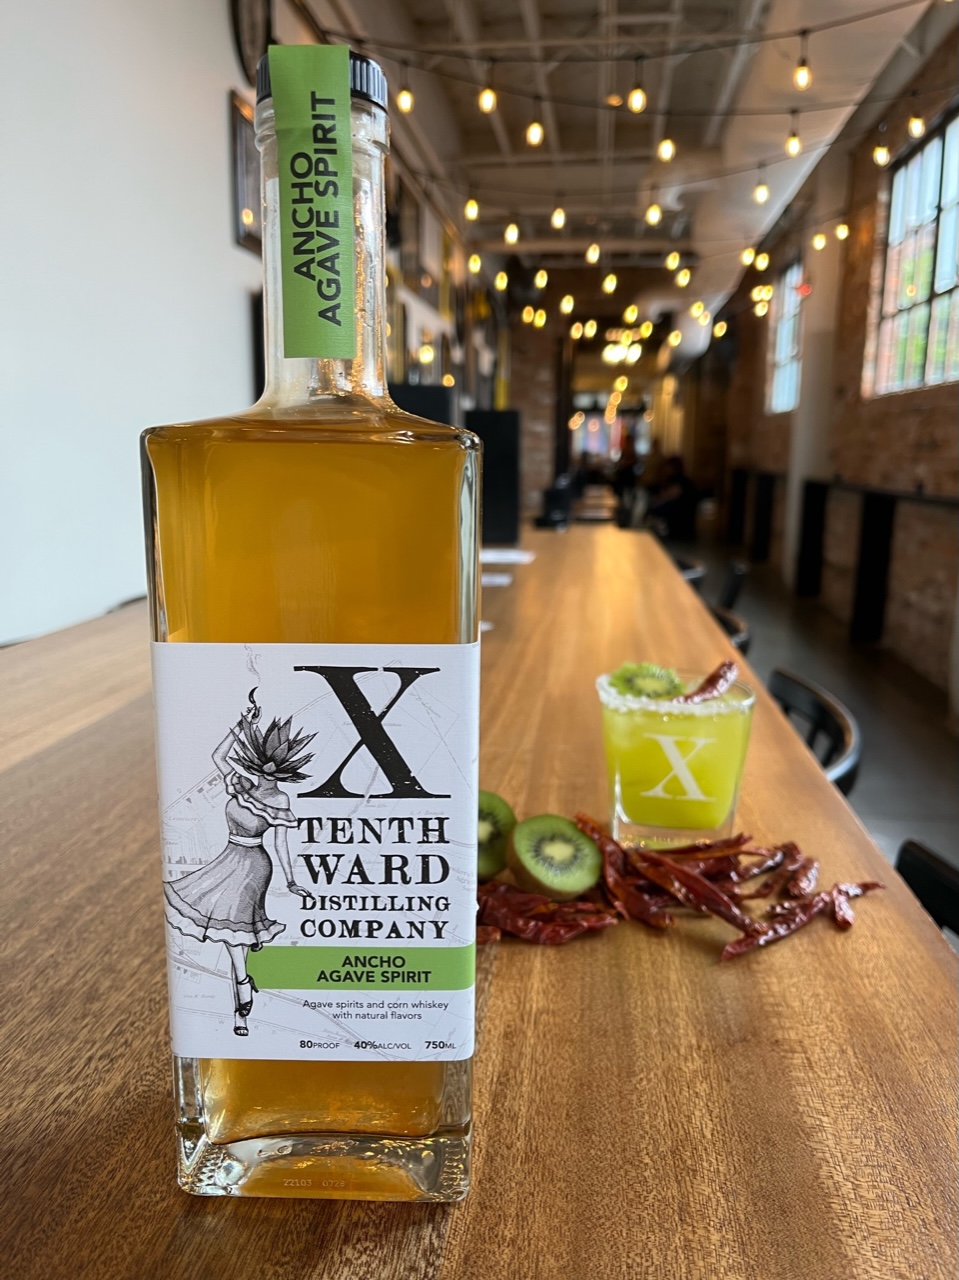 Agave spirit with cocktail by Tenth Ward